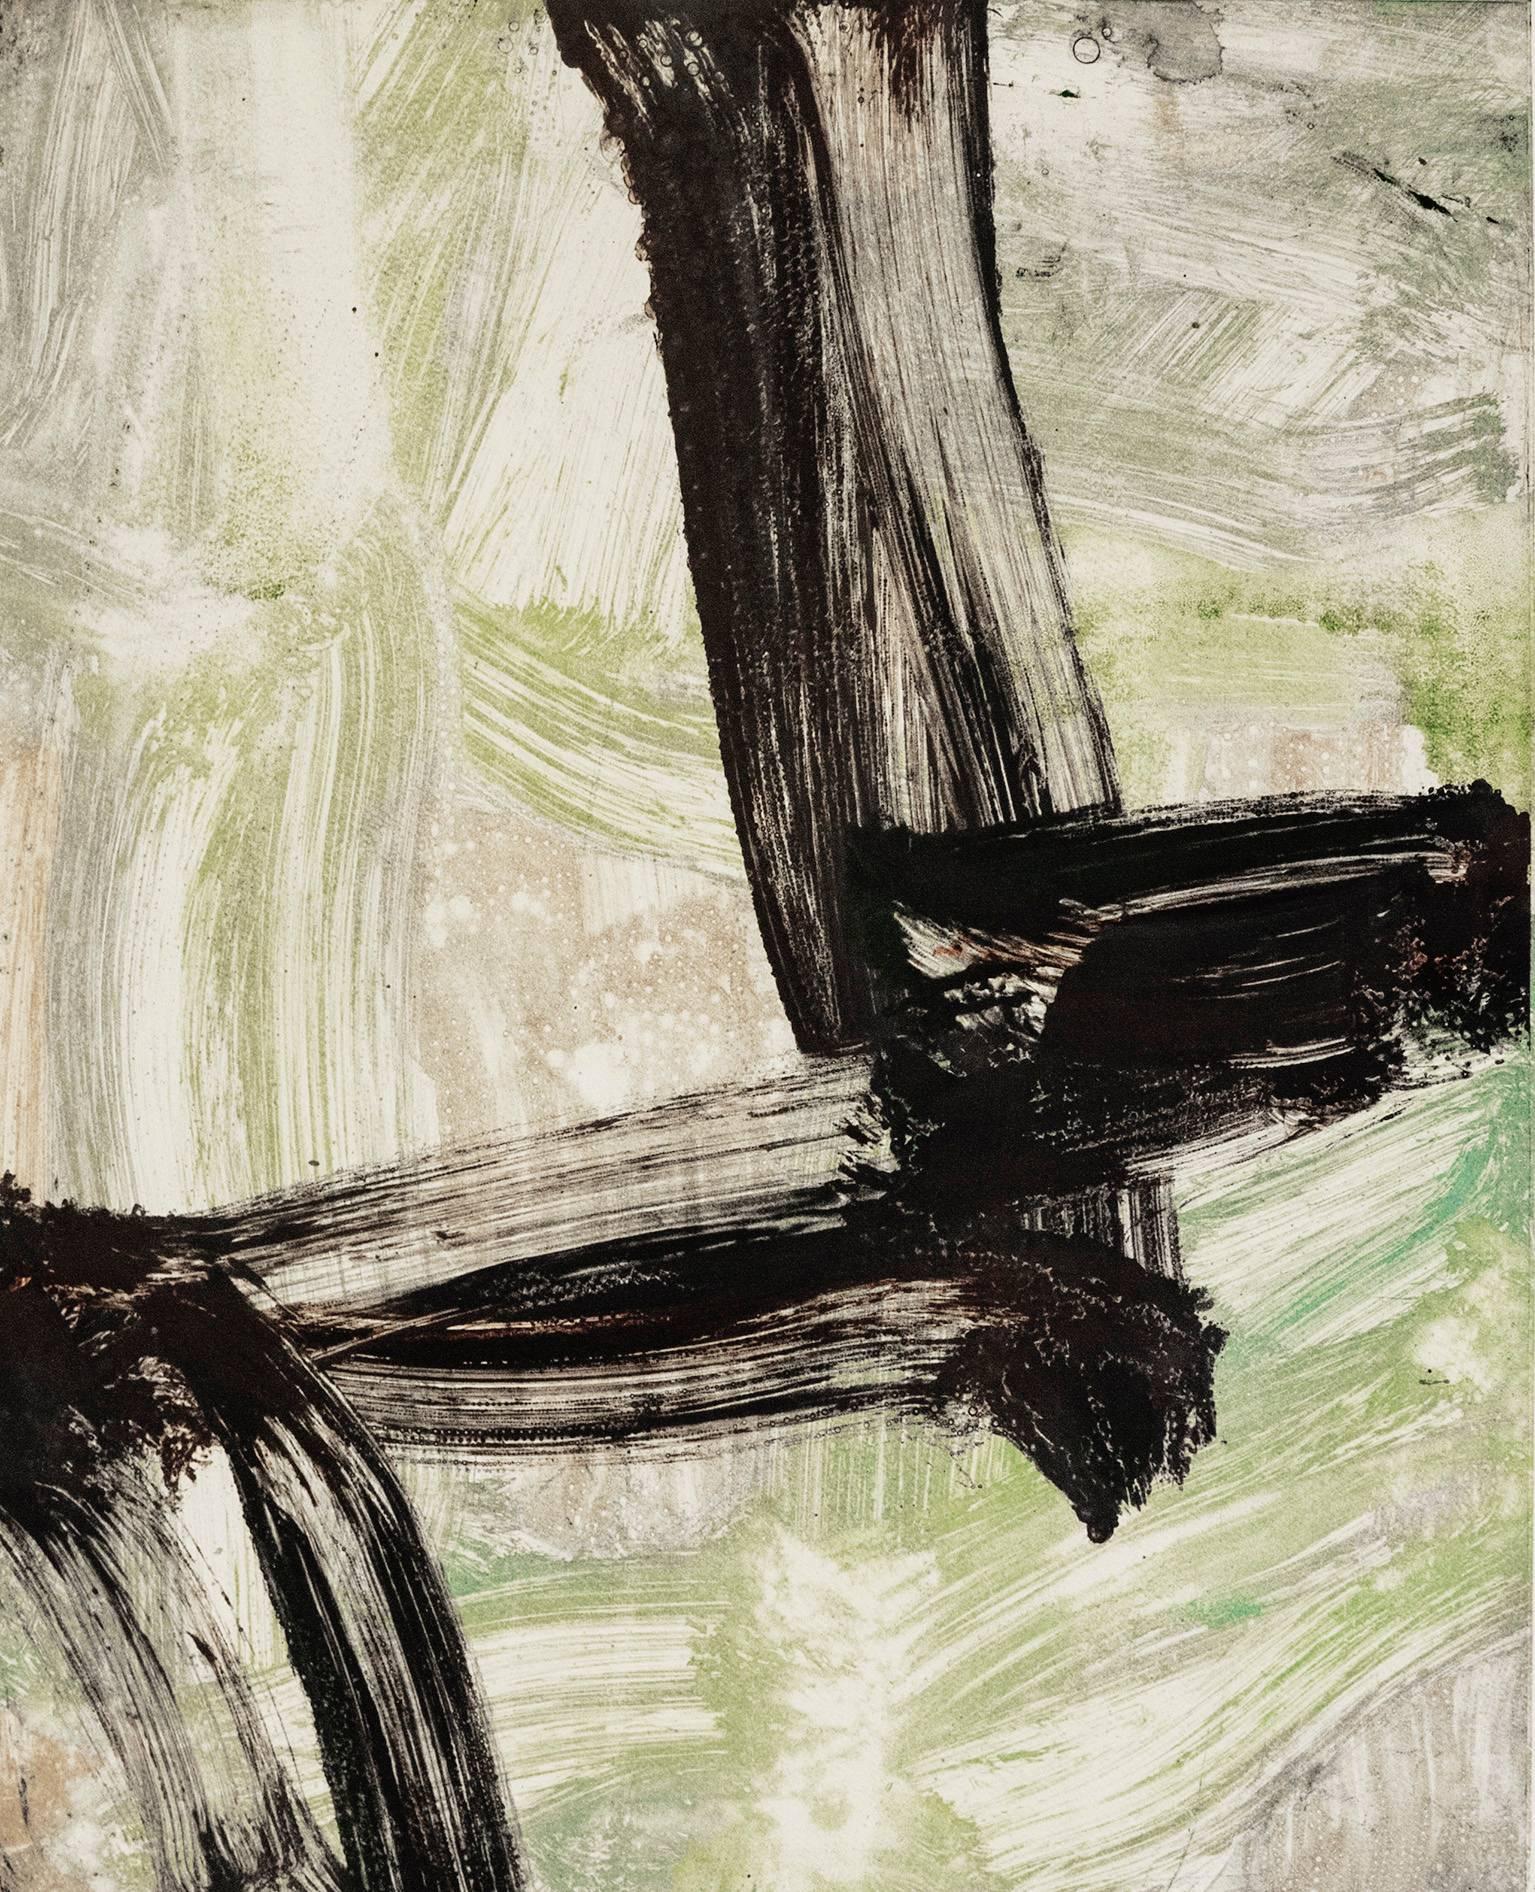 Mark Saltz Abstract Print - "July Series #49", painterly abstract print with burnt umber, greens, grays. 